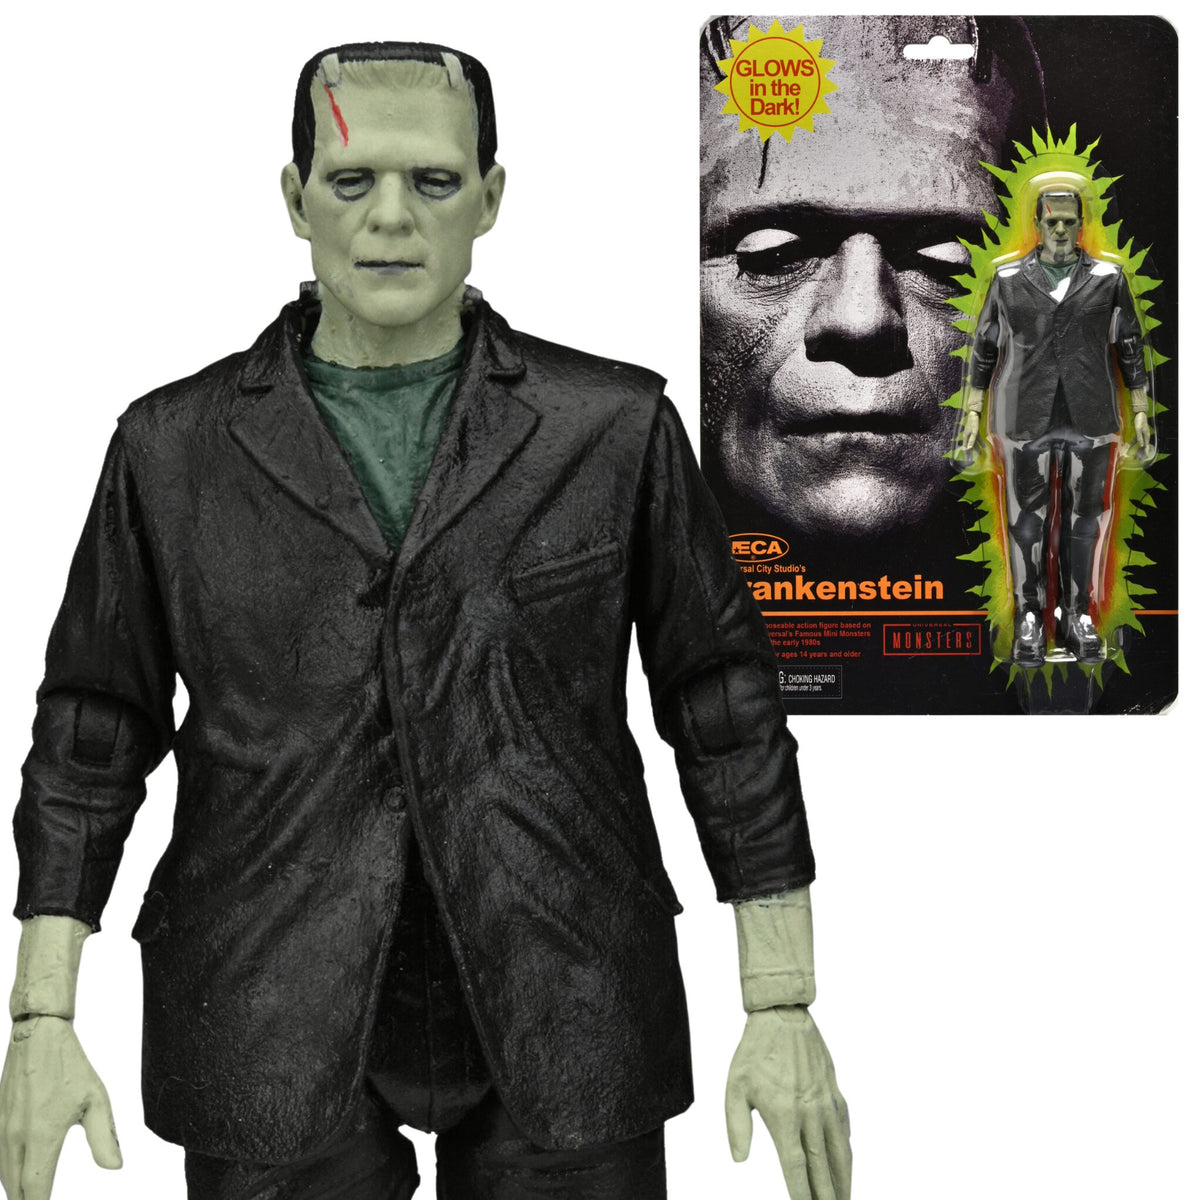 Universal Monsters Retro Glow-in-the-Dark 7-Inch Scale Action Figure  Assortment Set of 3